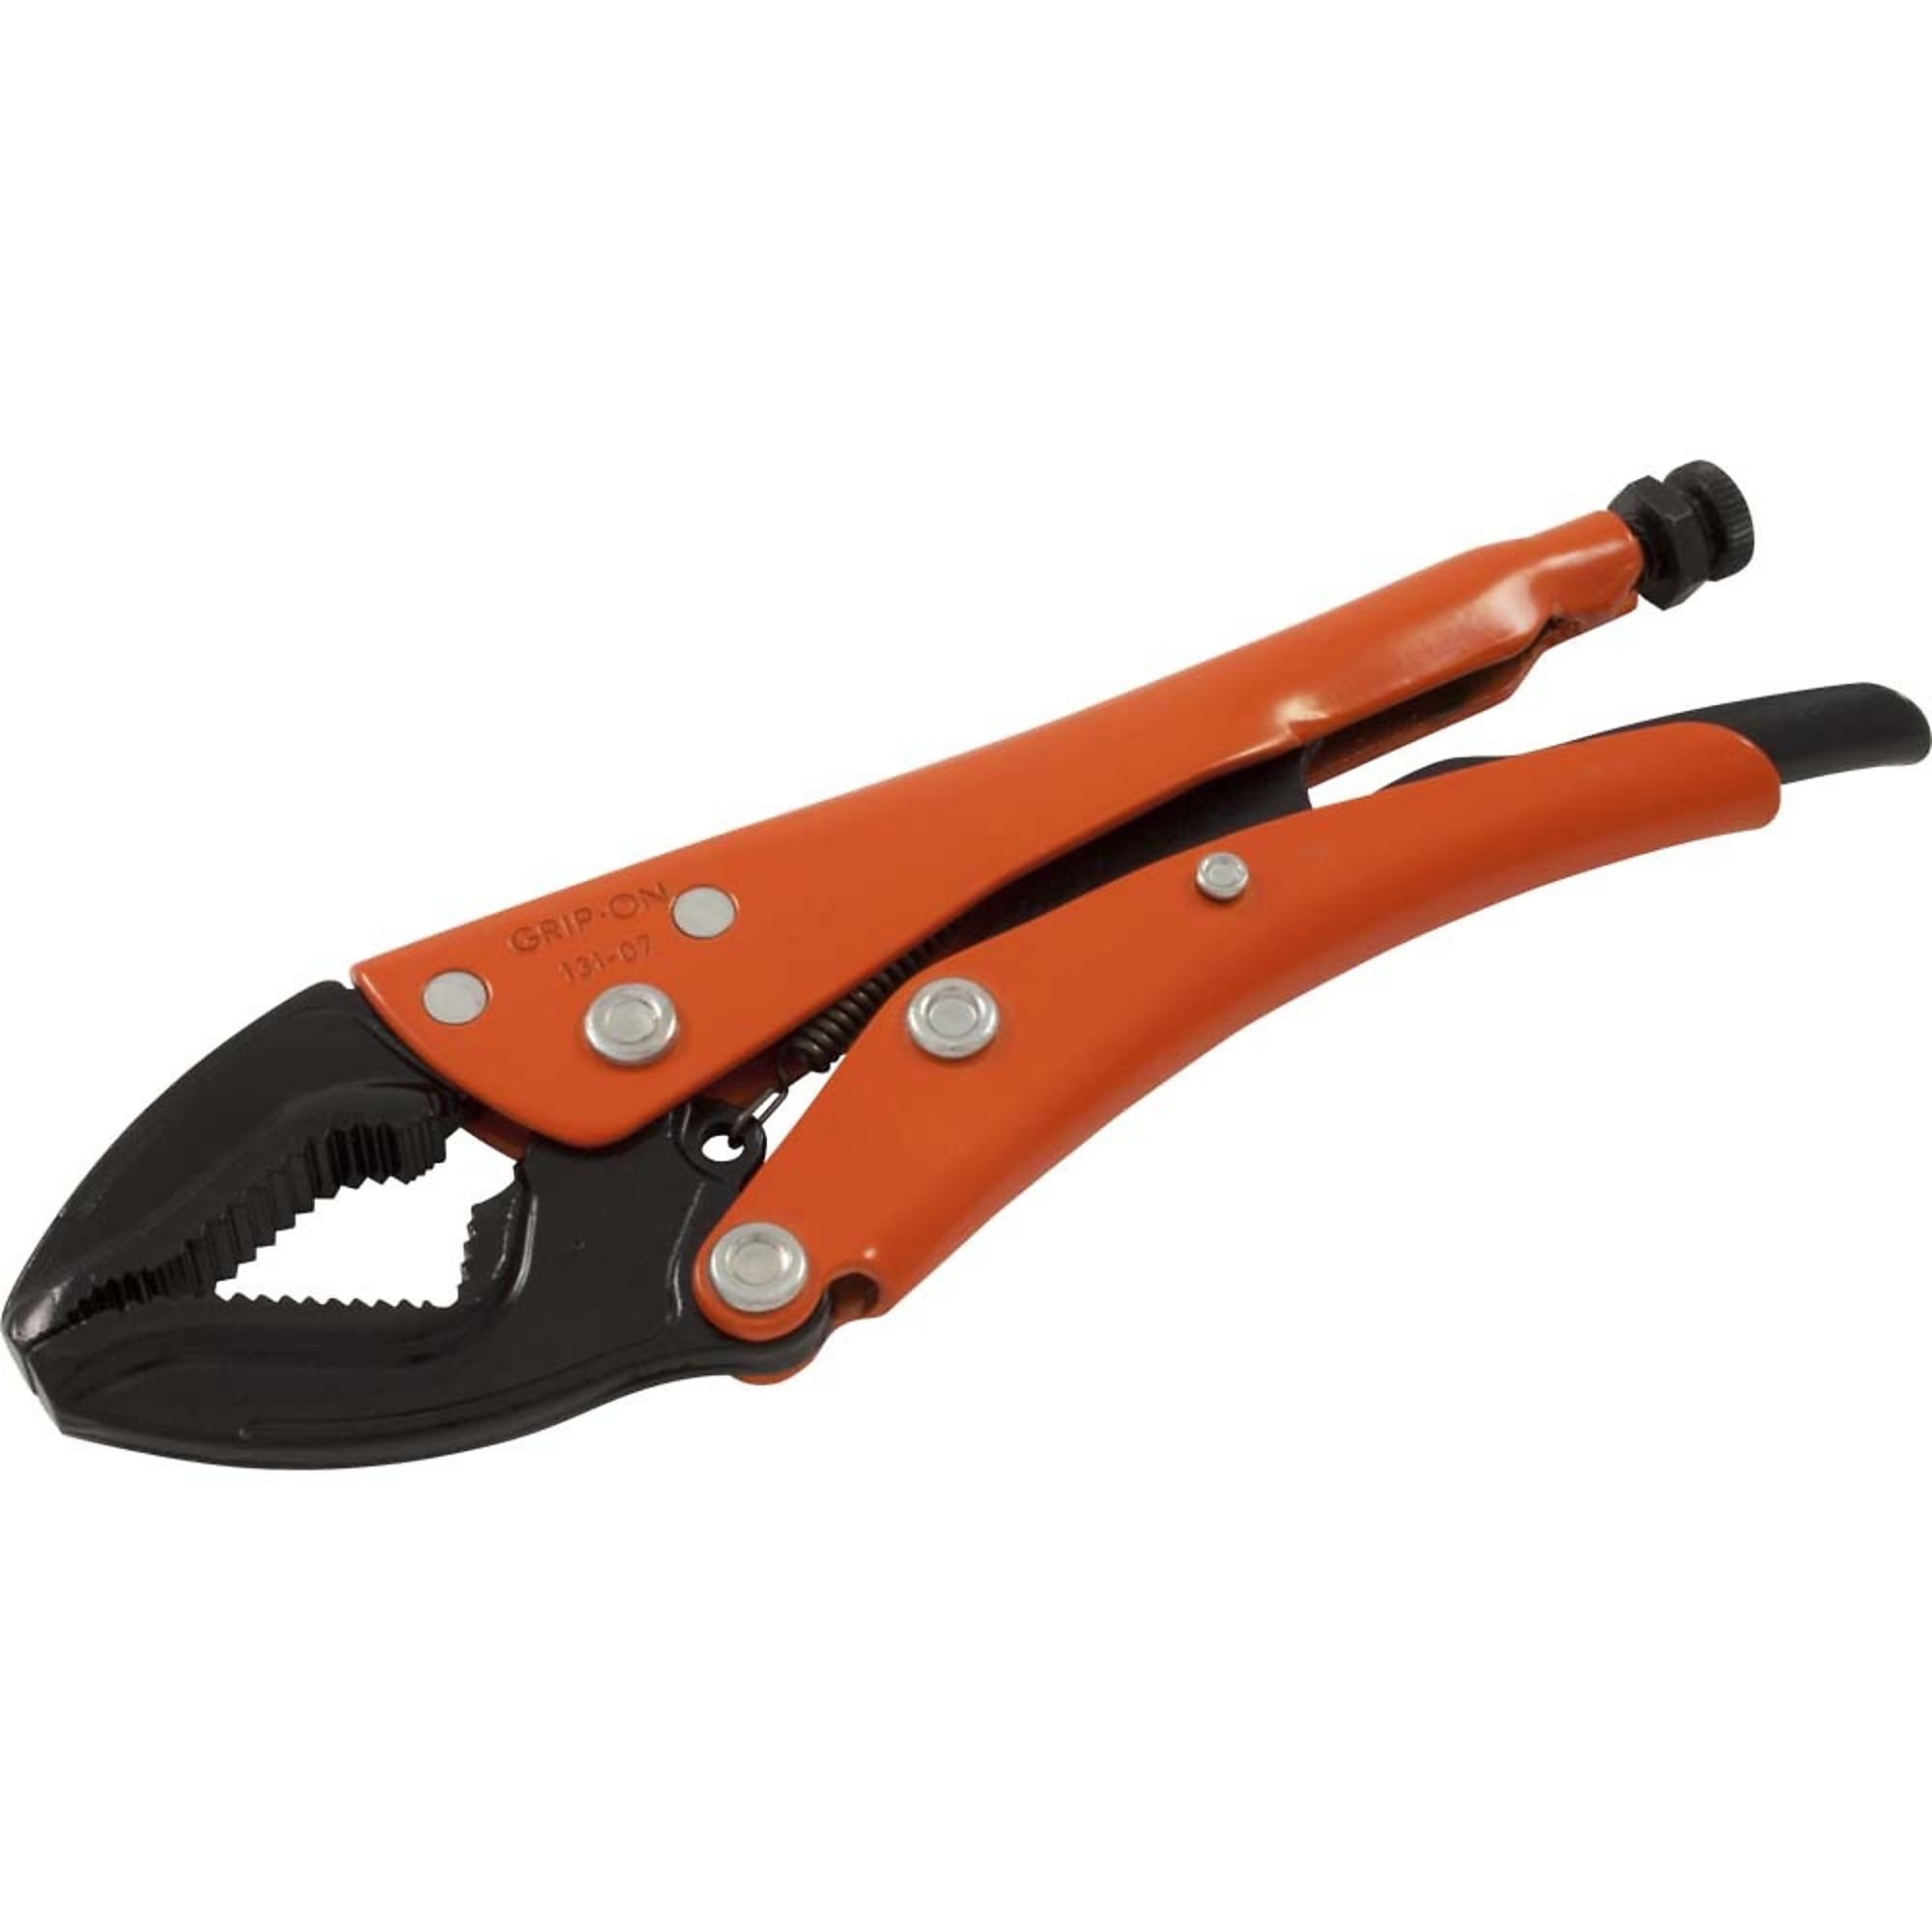 Grip-on, 7Inch Locking Pliers Omnium Grip, Pieces (qty.) 1 Material Alloy Steel, Jaw Capacity 2.05 in, Model 131-07